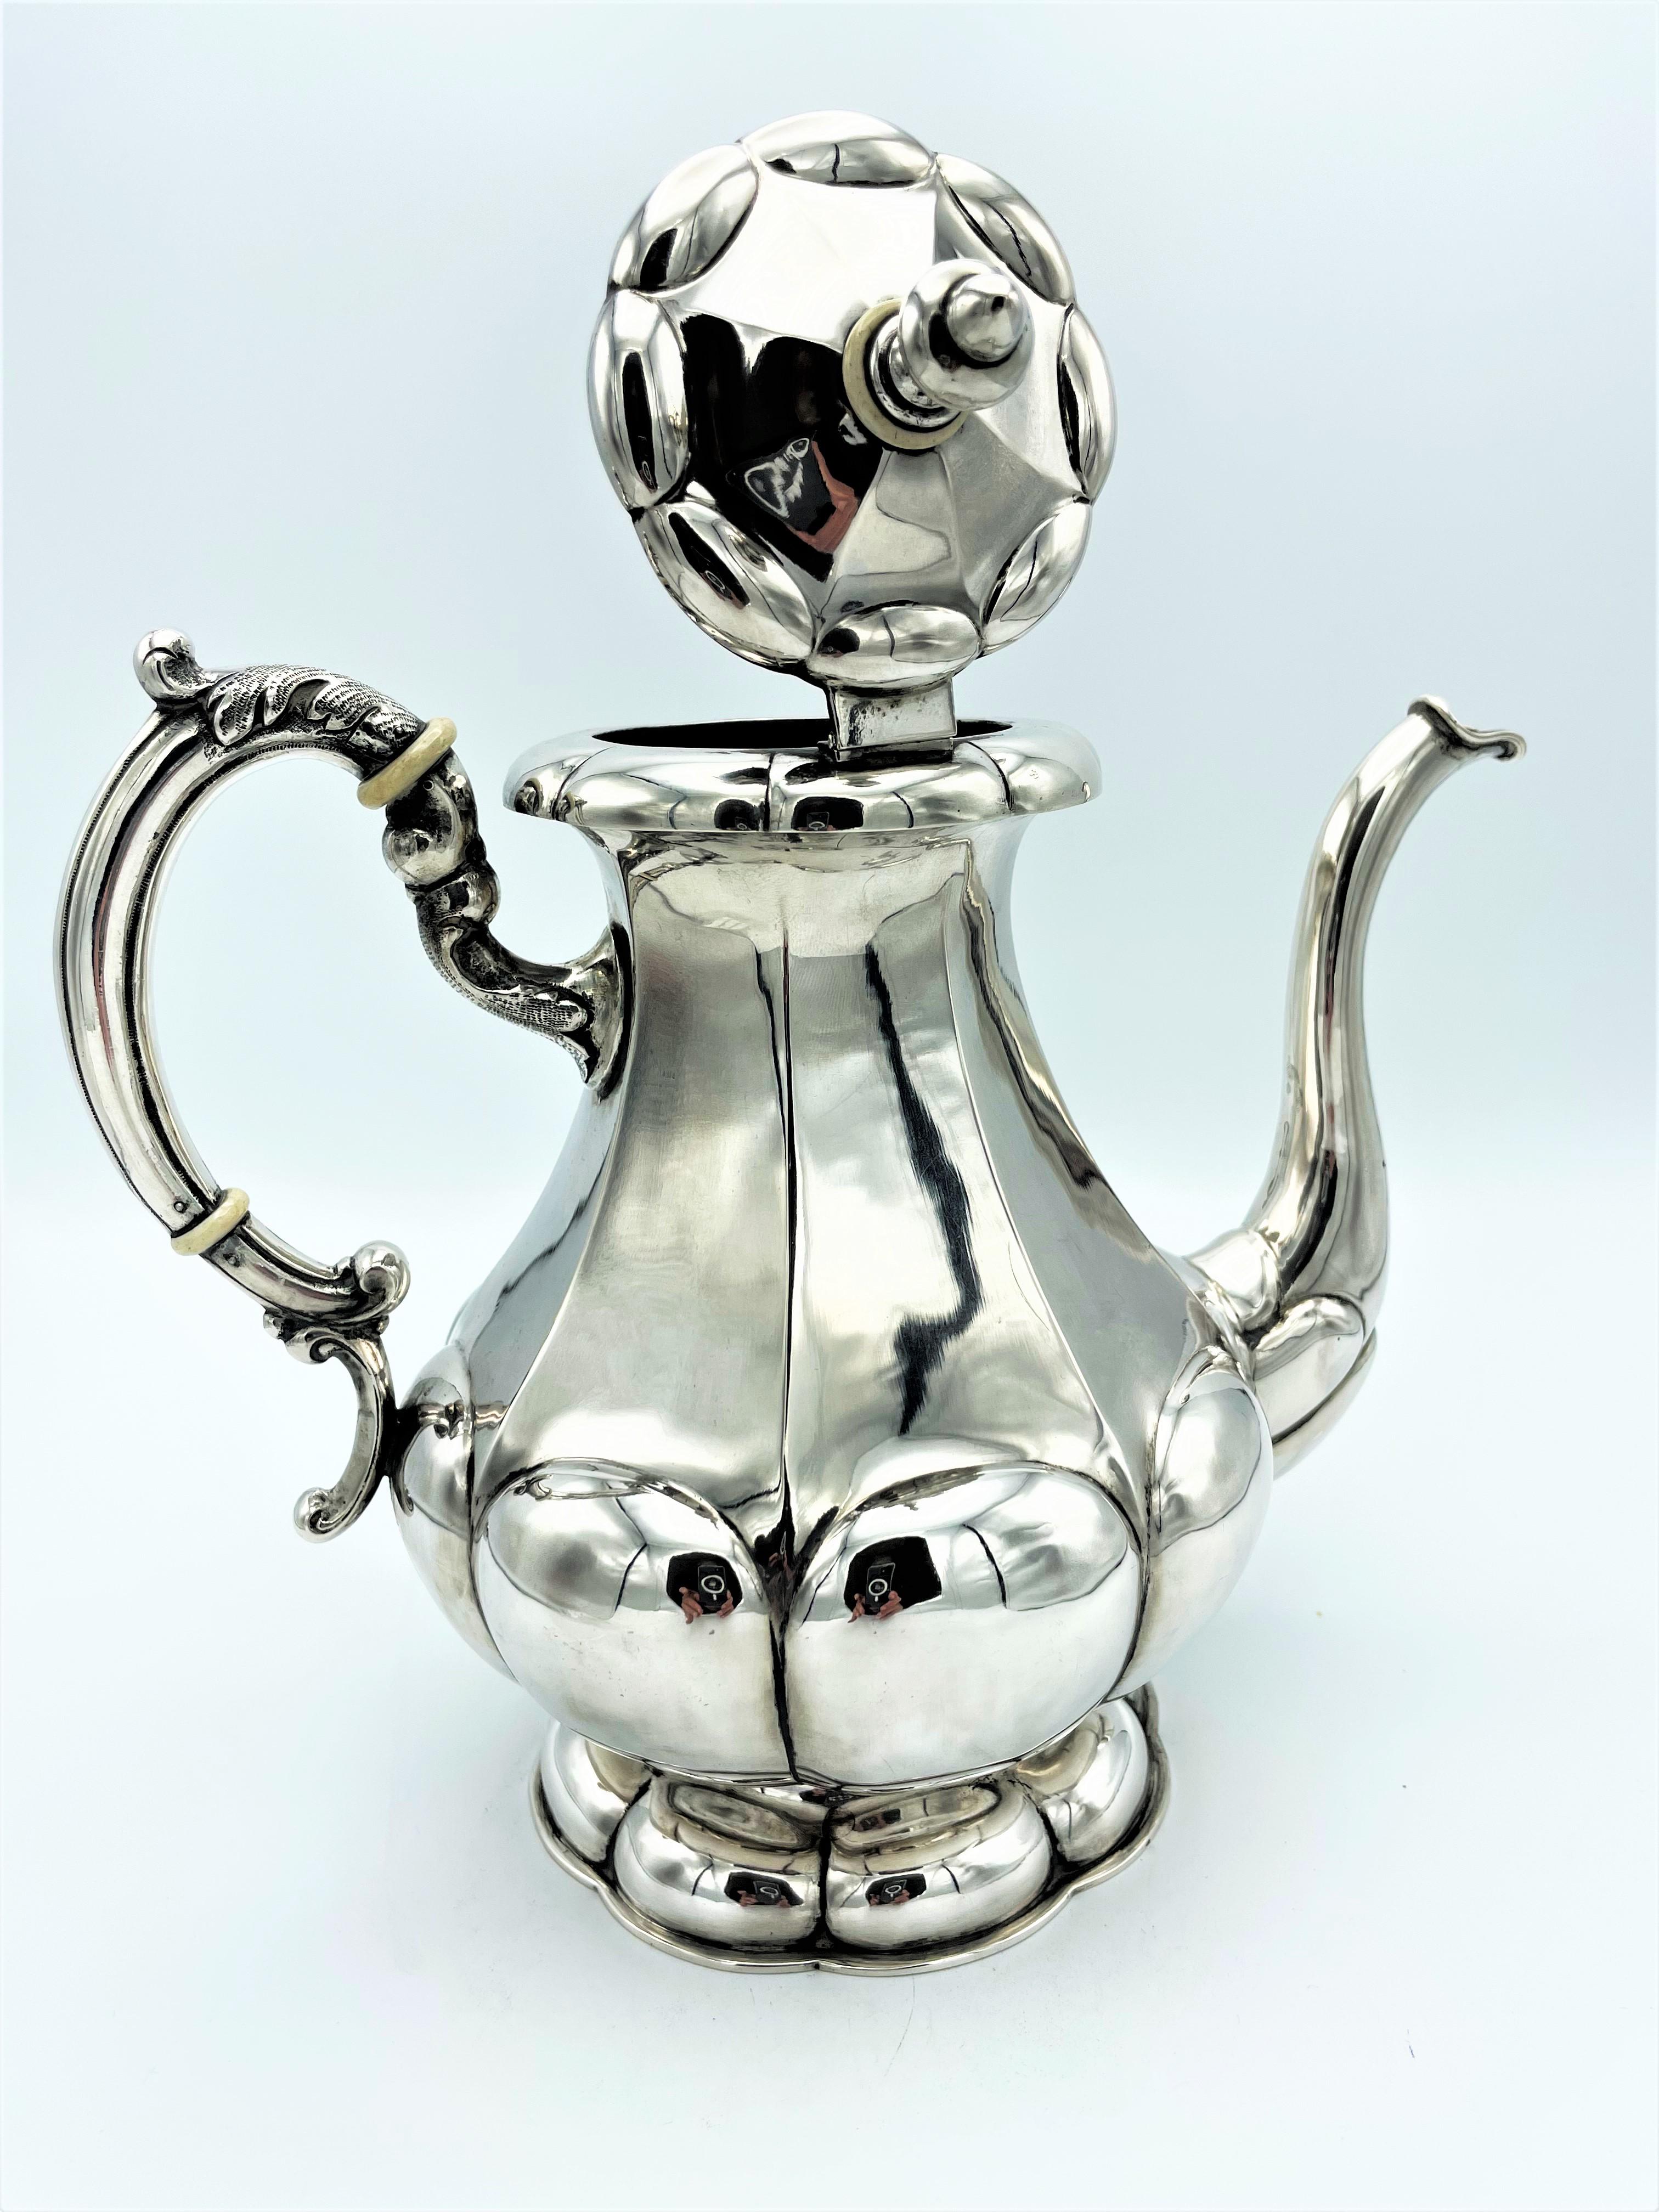 Austria-Hungary sterling silver 5 parts coffee service with tray, 1870s - 1920s For Sale 1